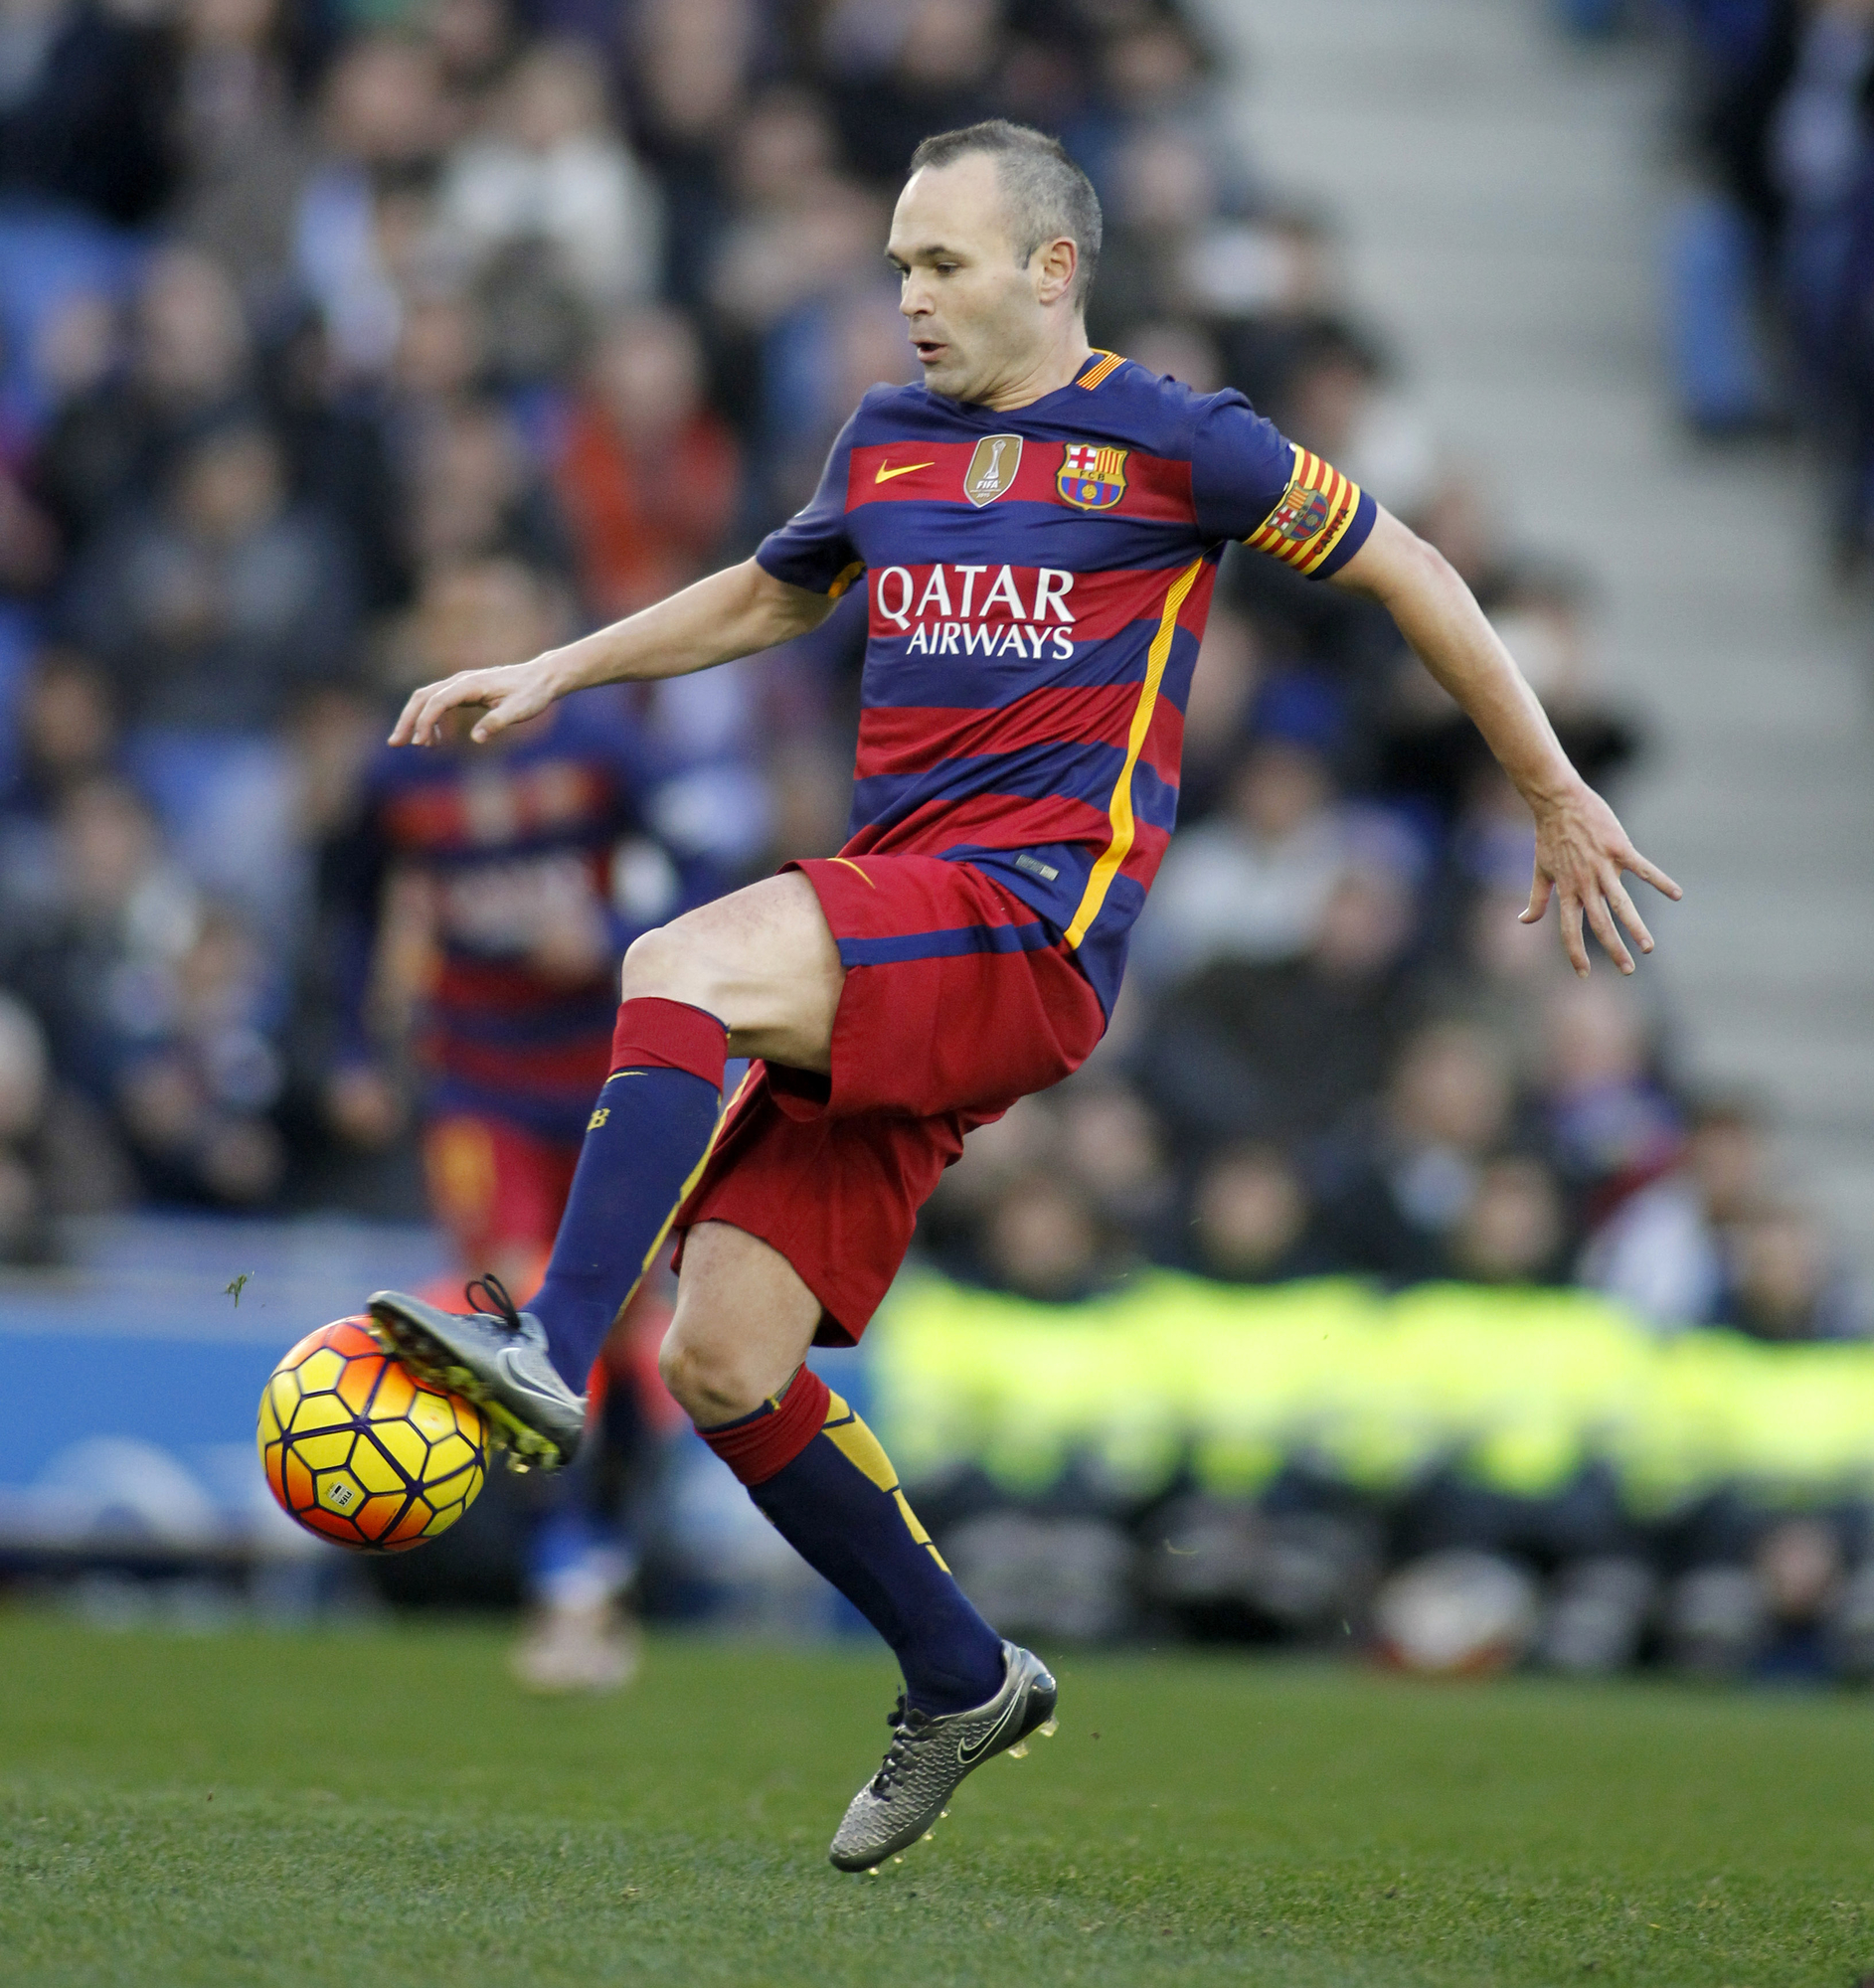 Andrés Iniesta's farewell to Barca could be dated